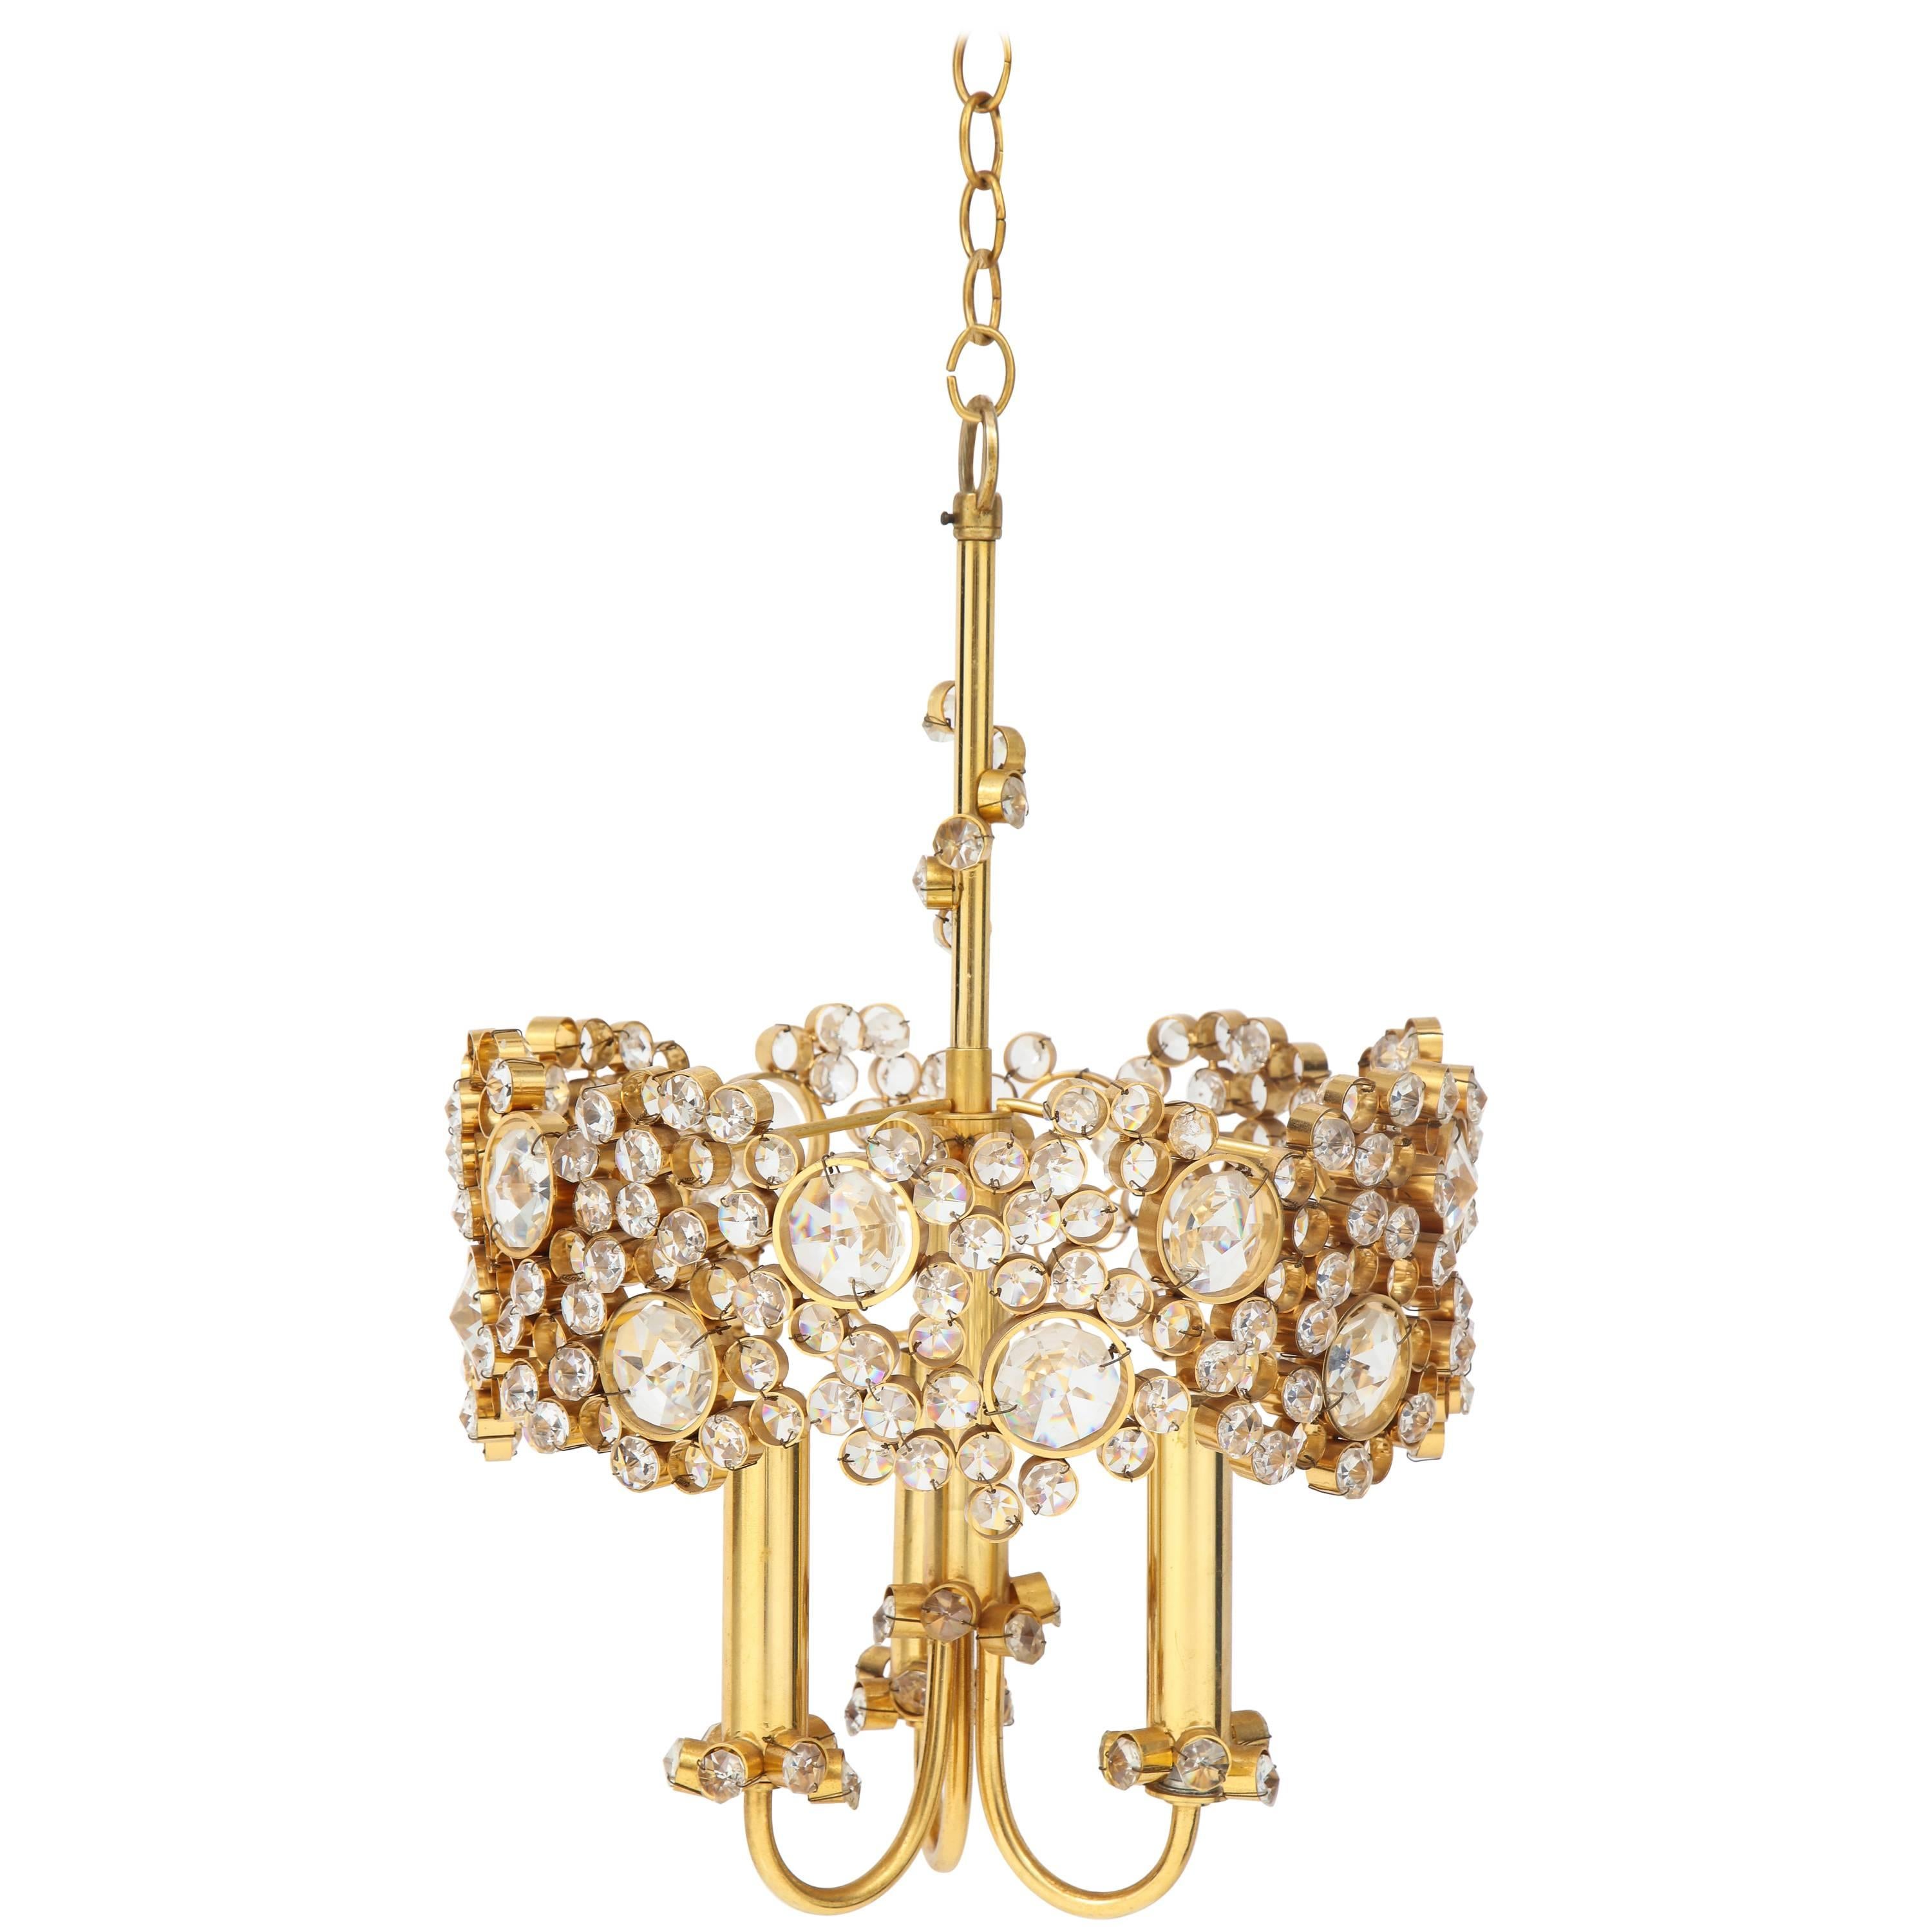 Gold-Plated and Crystal Chandelier by Palwa